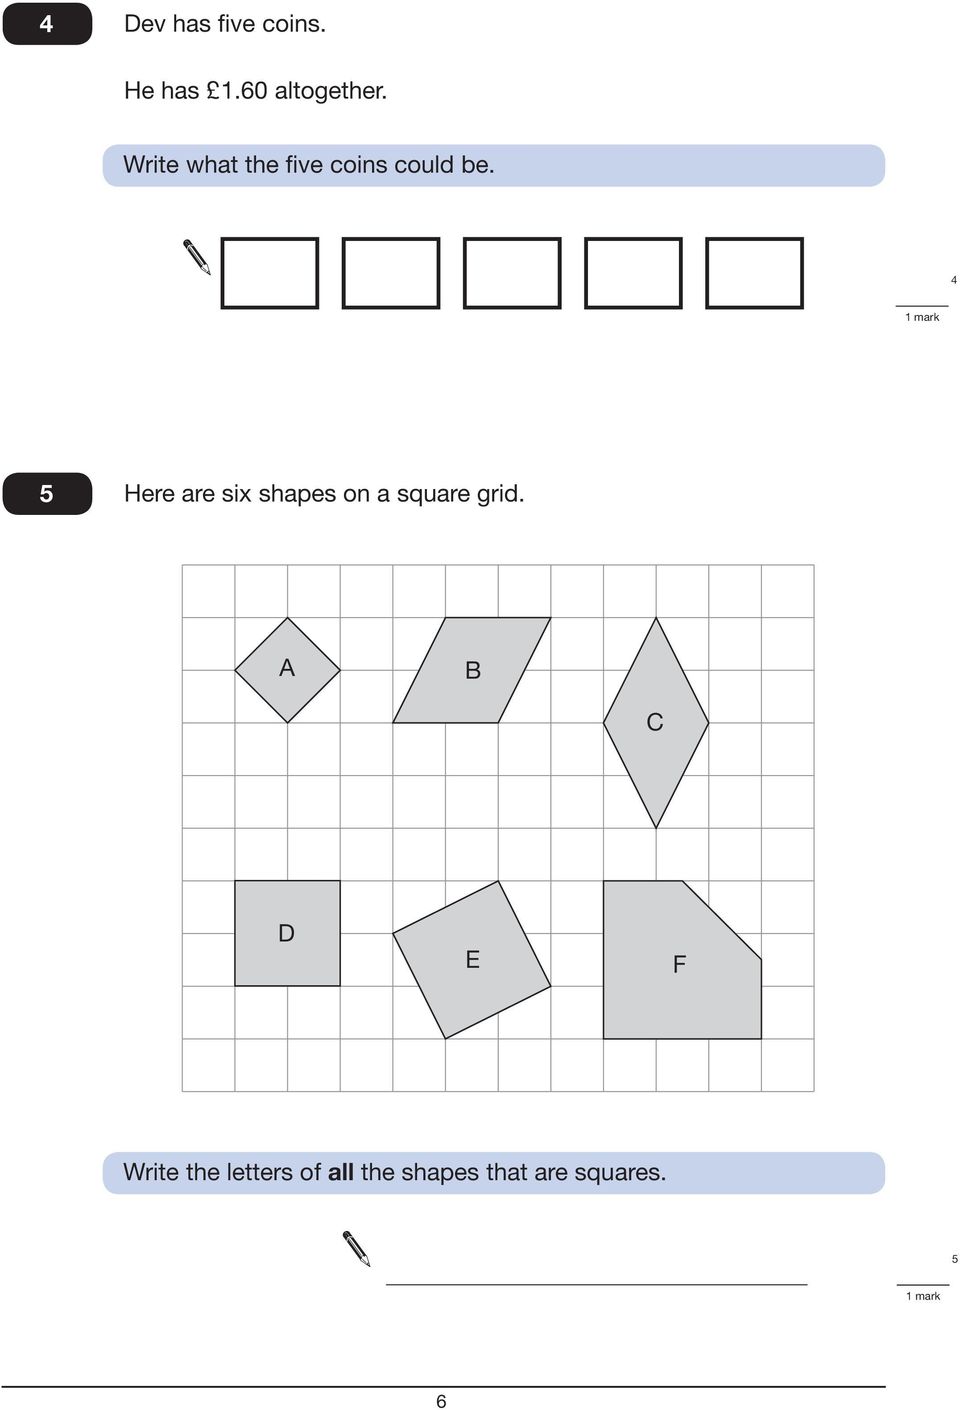 4 5 Here are six shapes on a square grid.